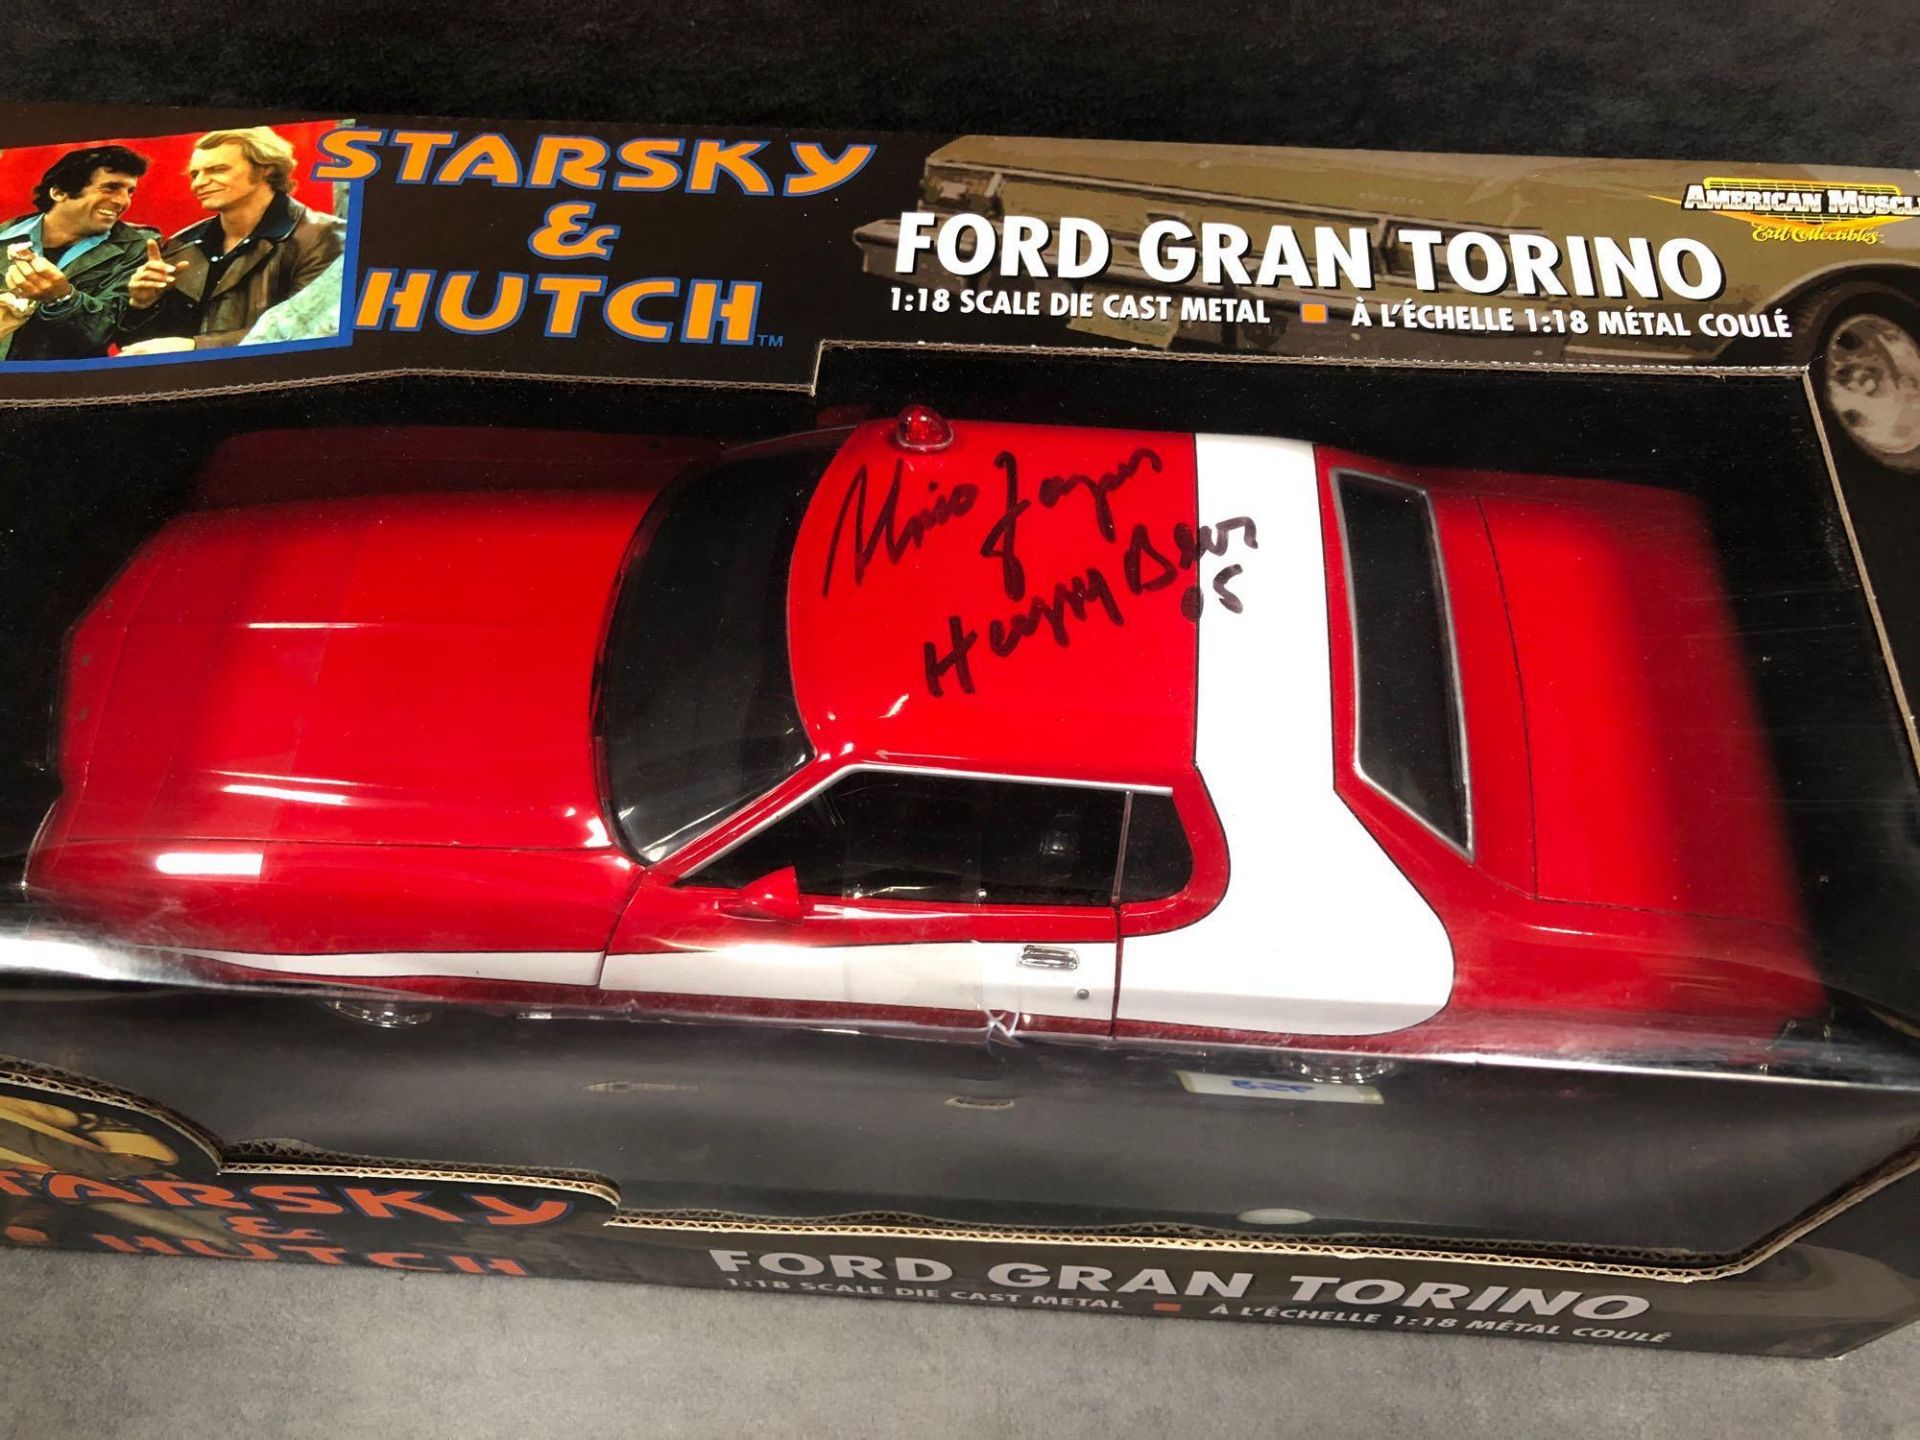 Signed by Antonio Fargus (Huggy Bear) American Muscle diecast 1/18 scale #36685 Starsky & Hutch - Image 2 of 2